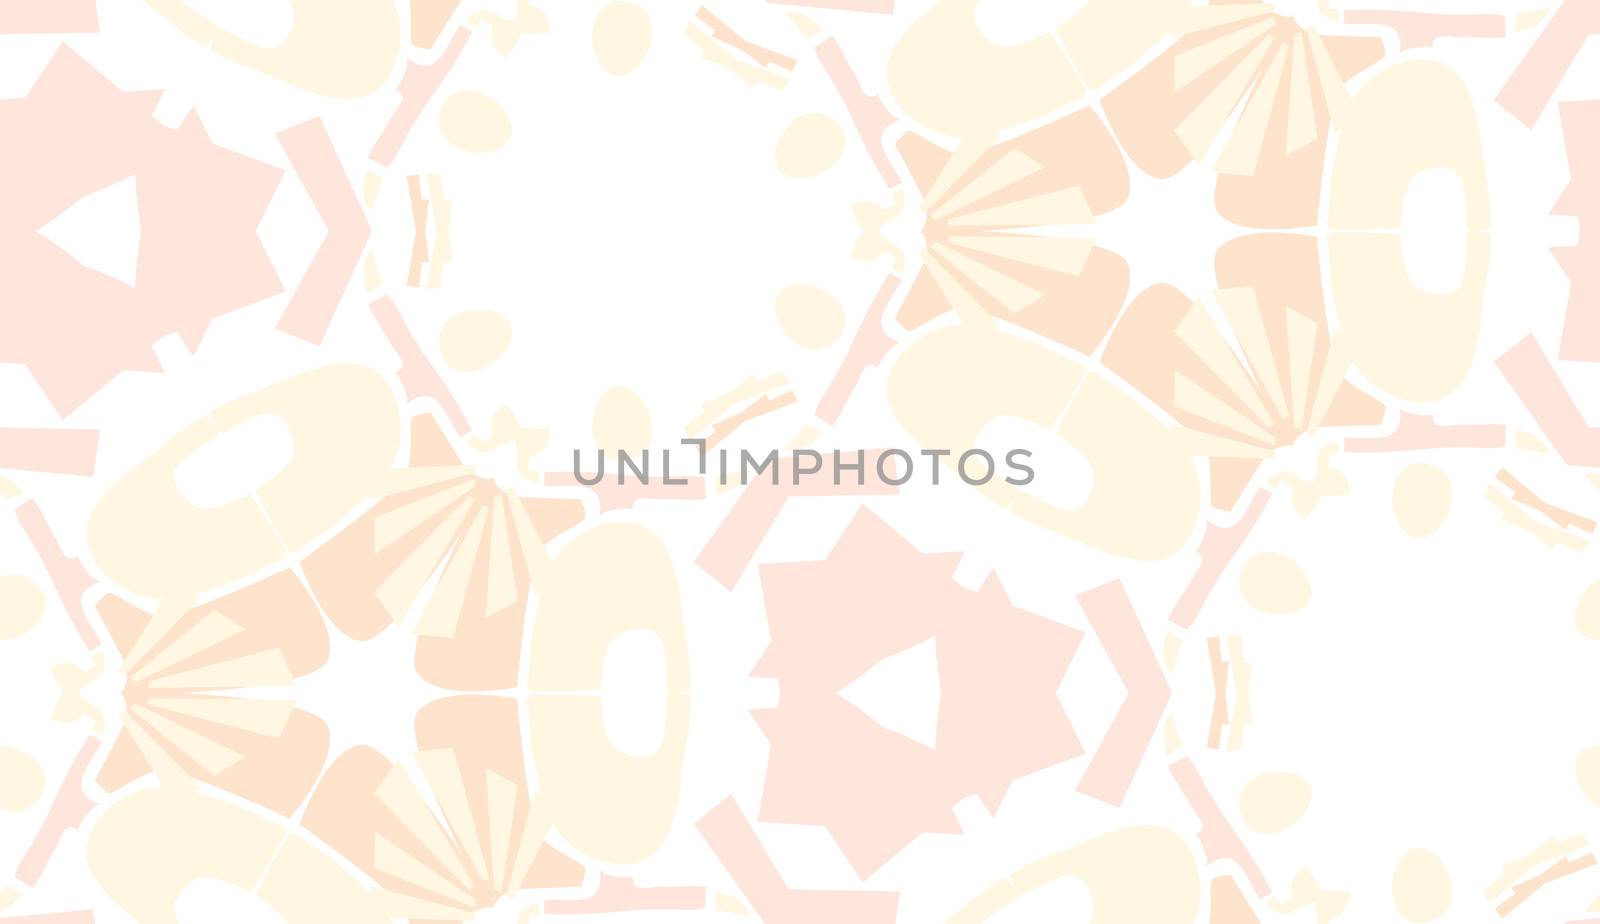 Repeating geometric blue shapes in wallpaper background pattern